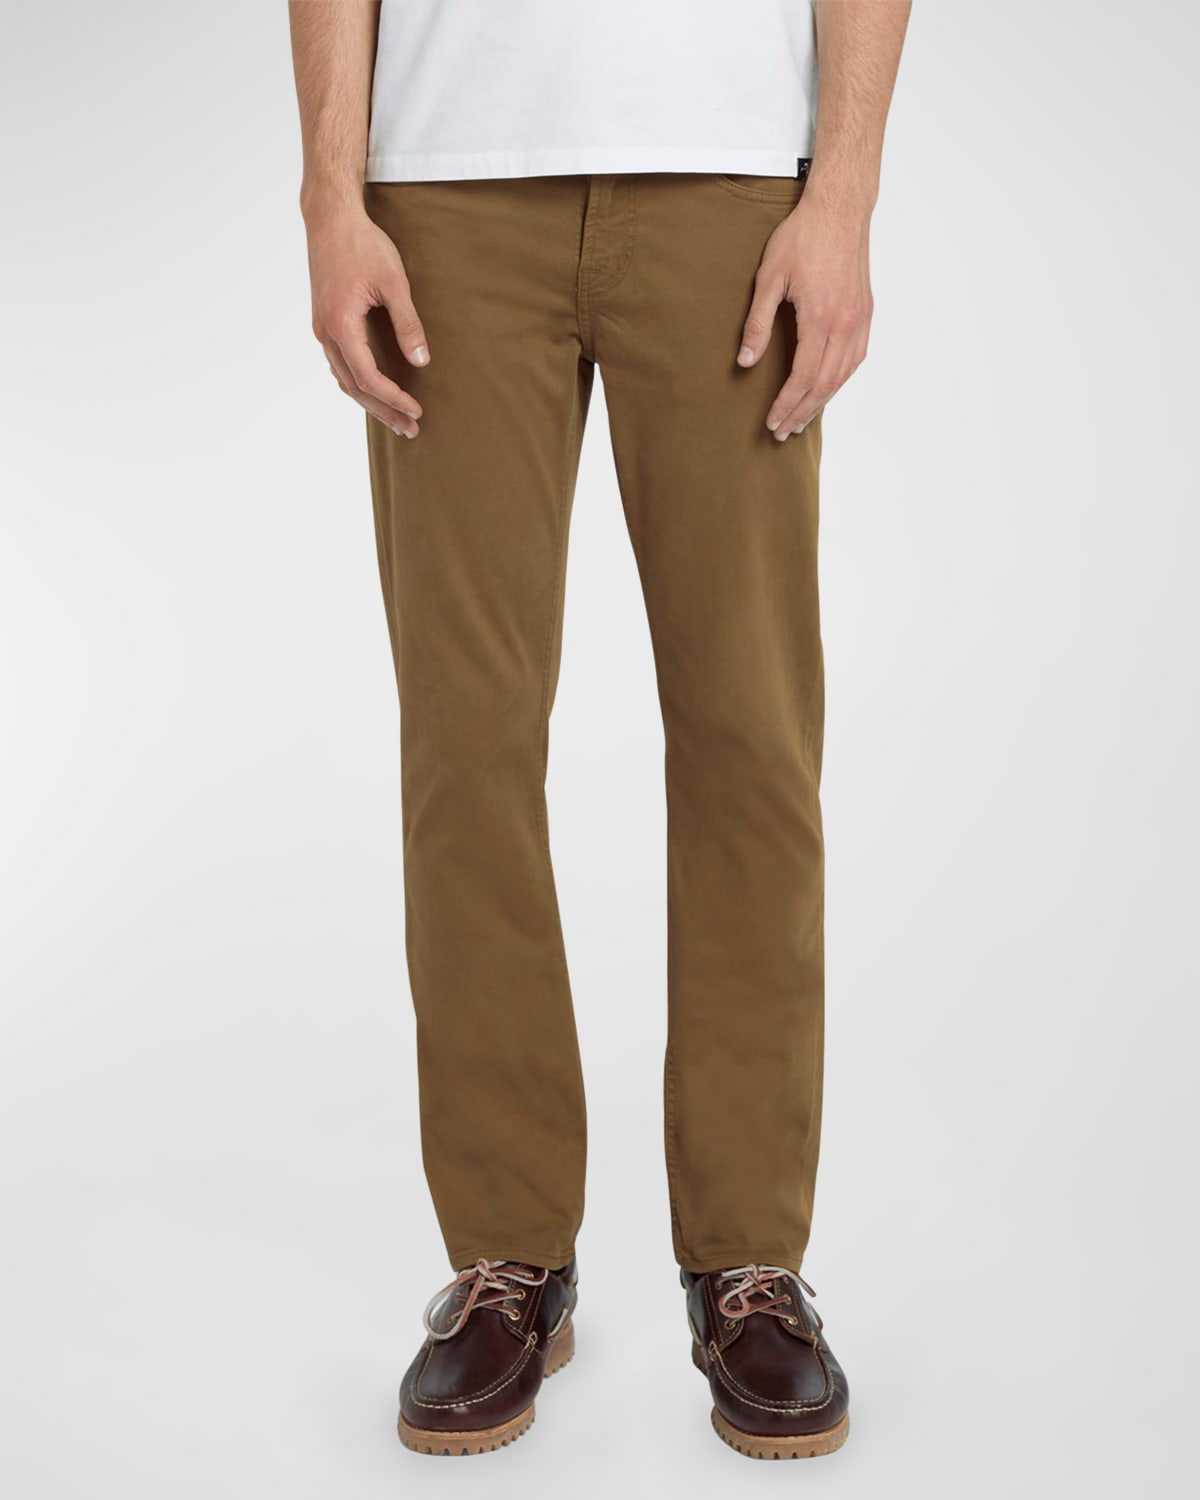 7 For All Mankind Men's Slimmy Luxe Performance Plus Pants In River Bed